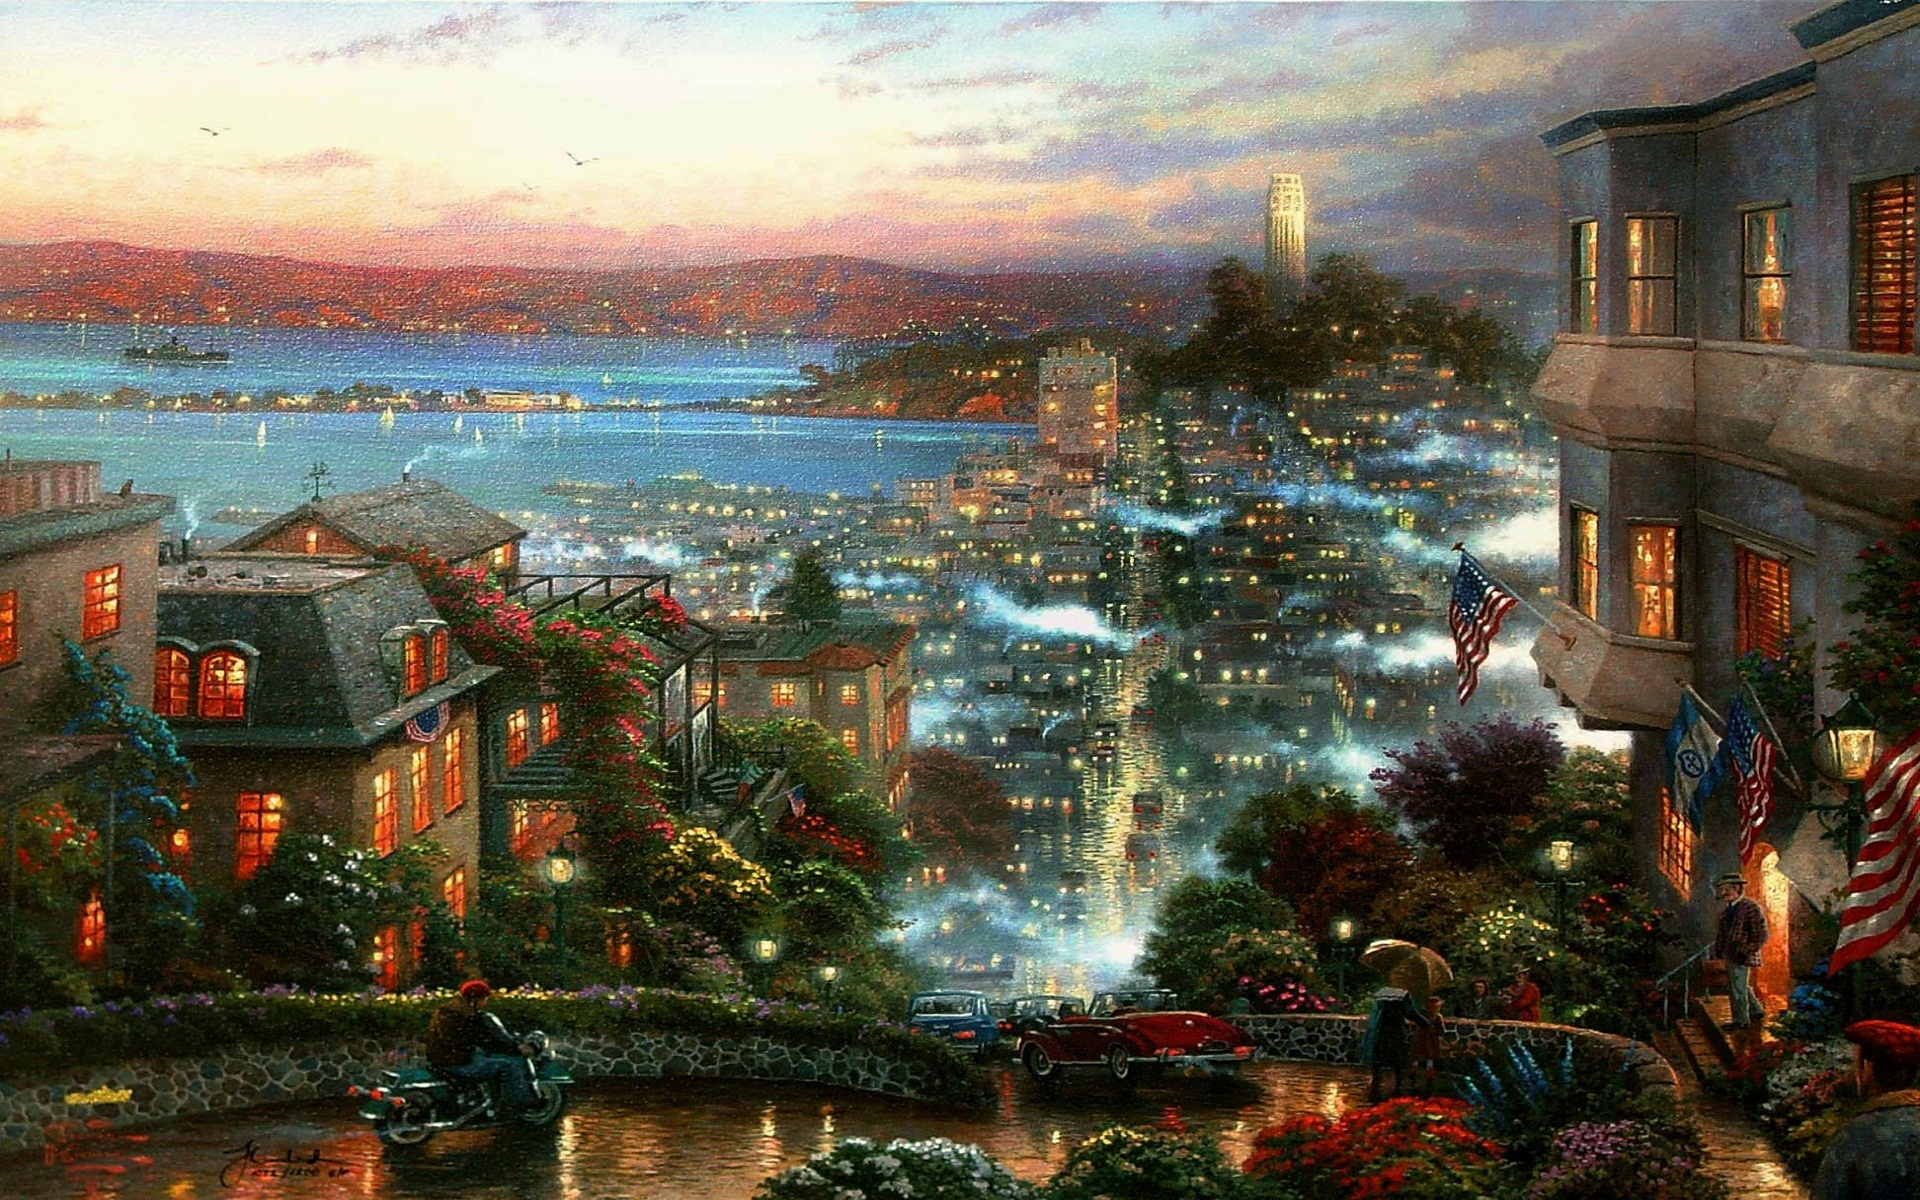 Thomas Kinkade HD Wallpaper - HD Wallpapers Backgrounds of Your Choice